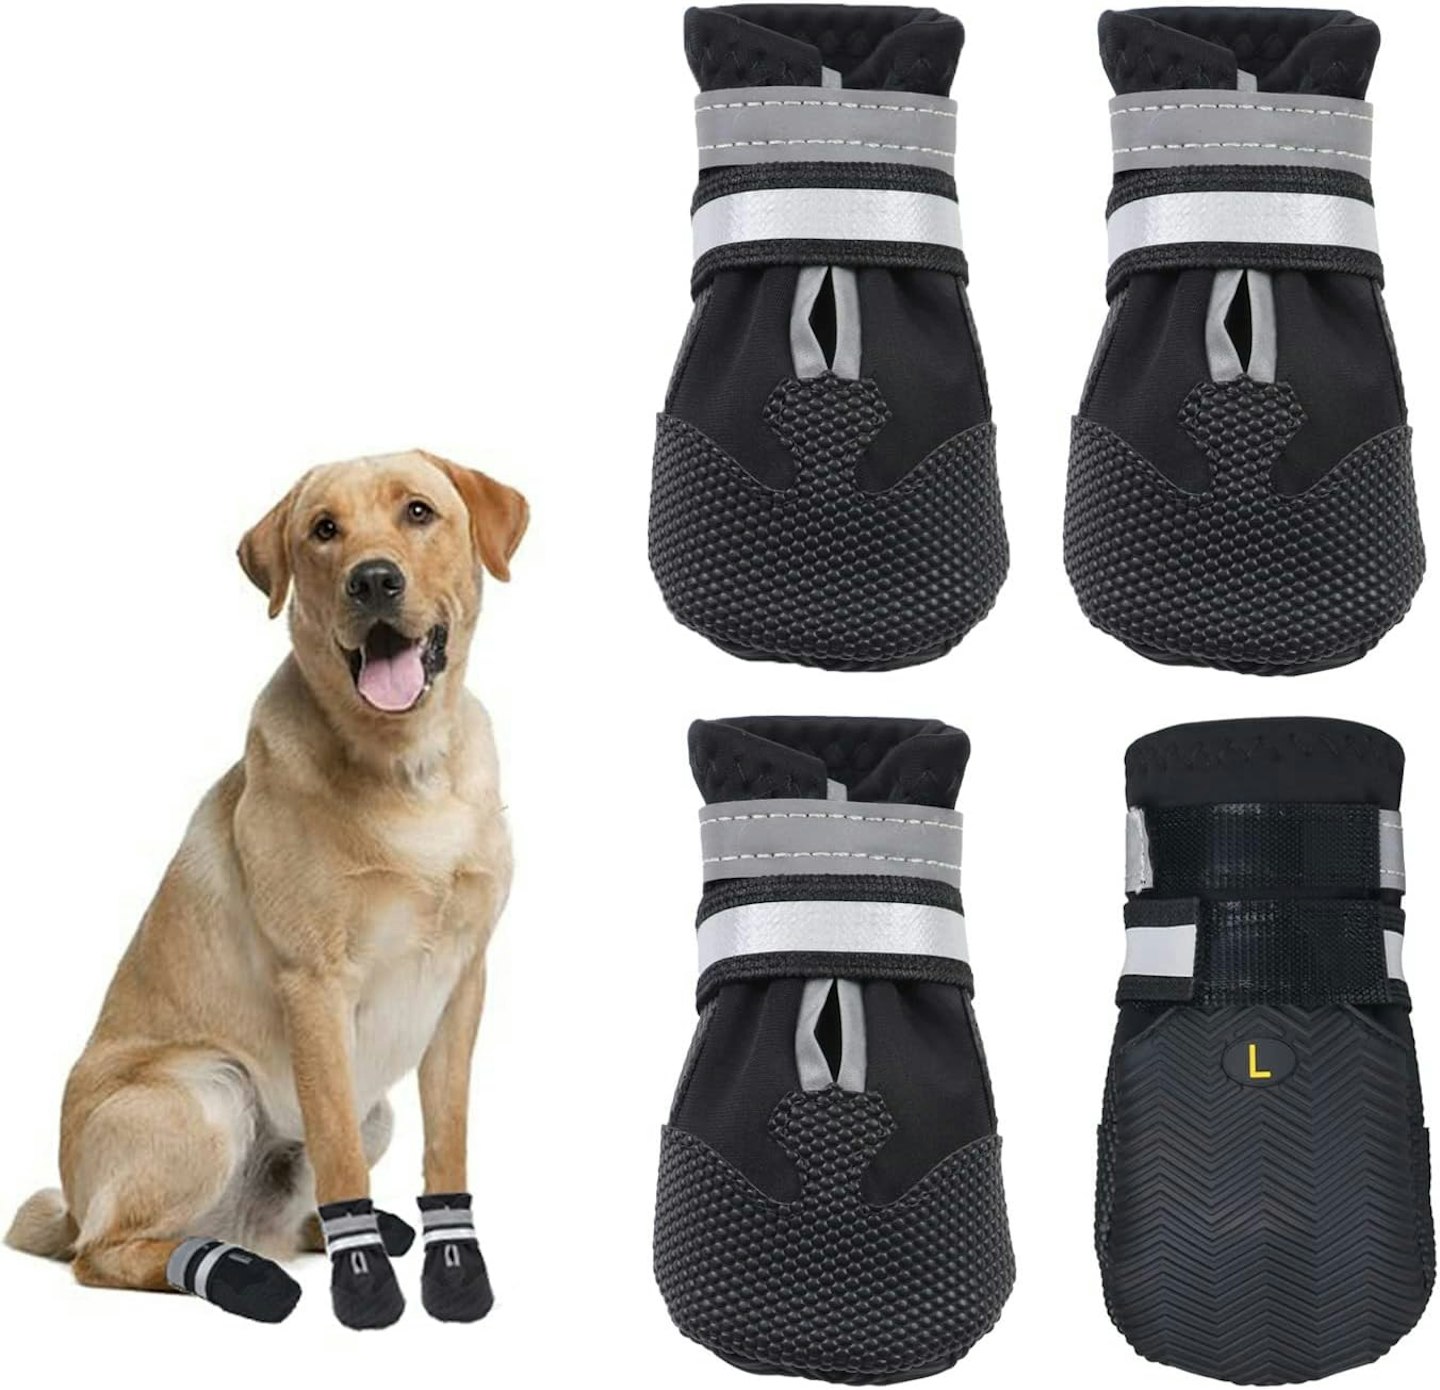 product card for dog shoes